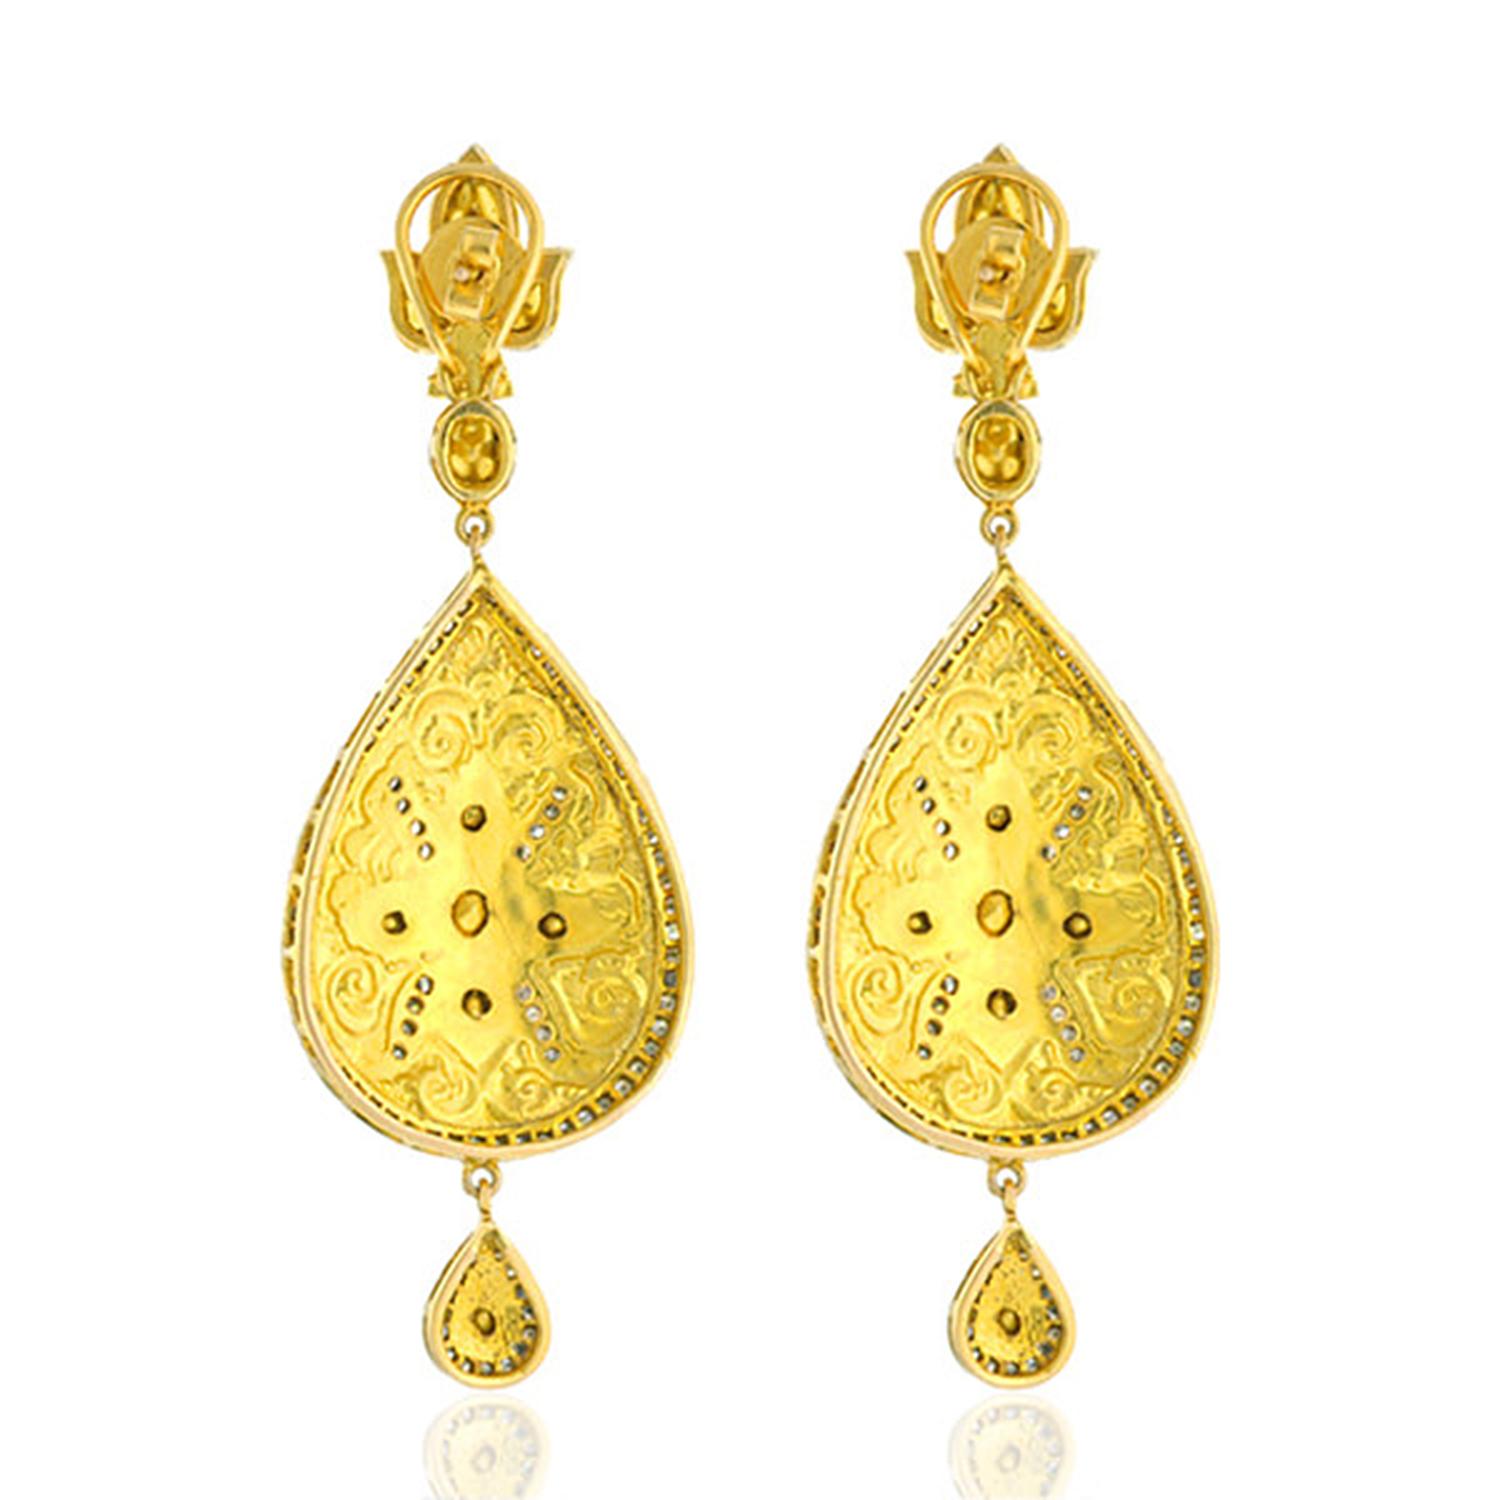 Cast from 14-karat gold & sterling silver, these antique style earrings are hand set with 4.91 carats rose cut diamonds.

FOLLOW  MEGHNA JEWELS storefront to view the latest collection & exclusive pieces.  Meghna Jewels is proudly rated as a Top